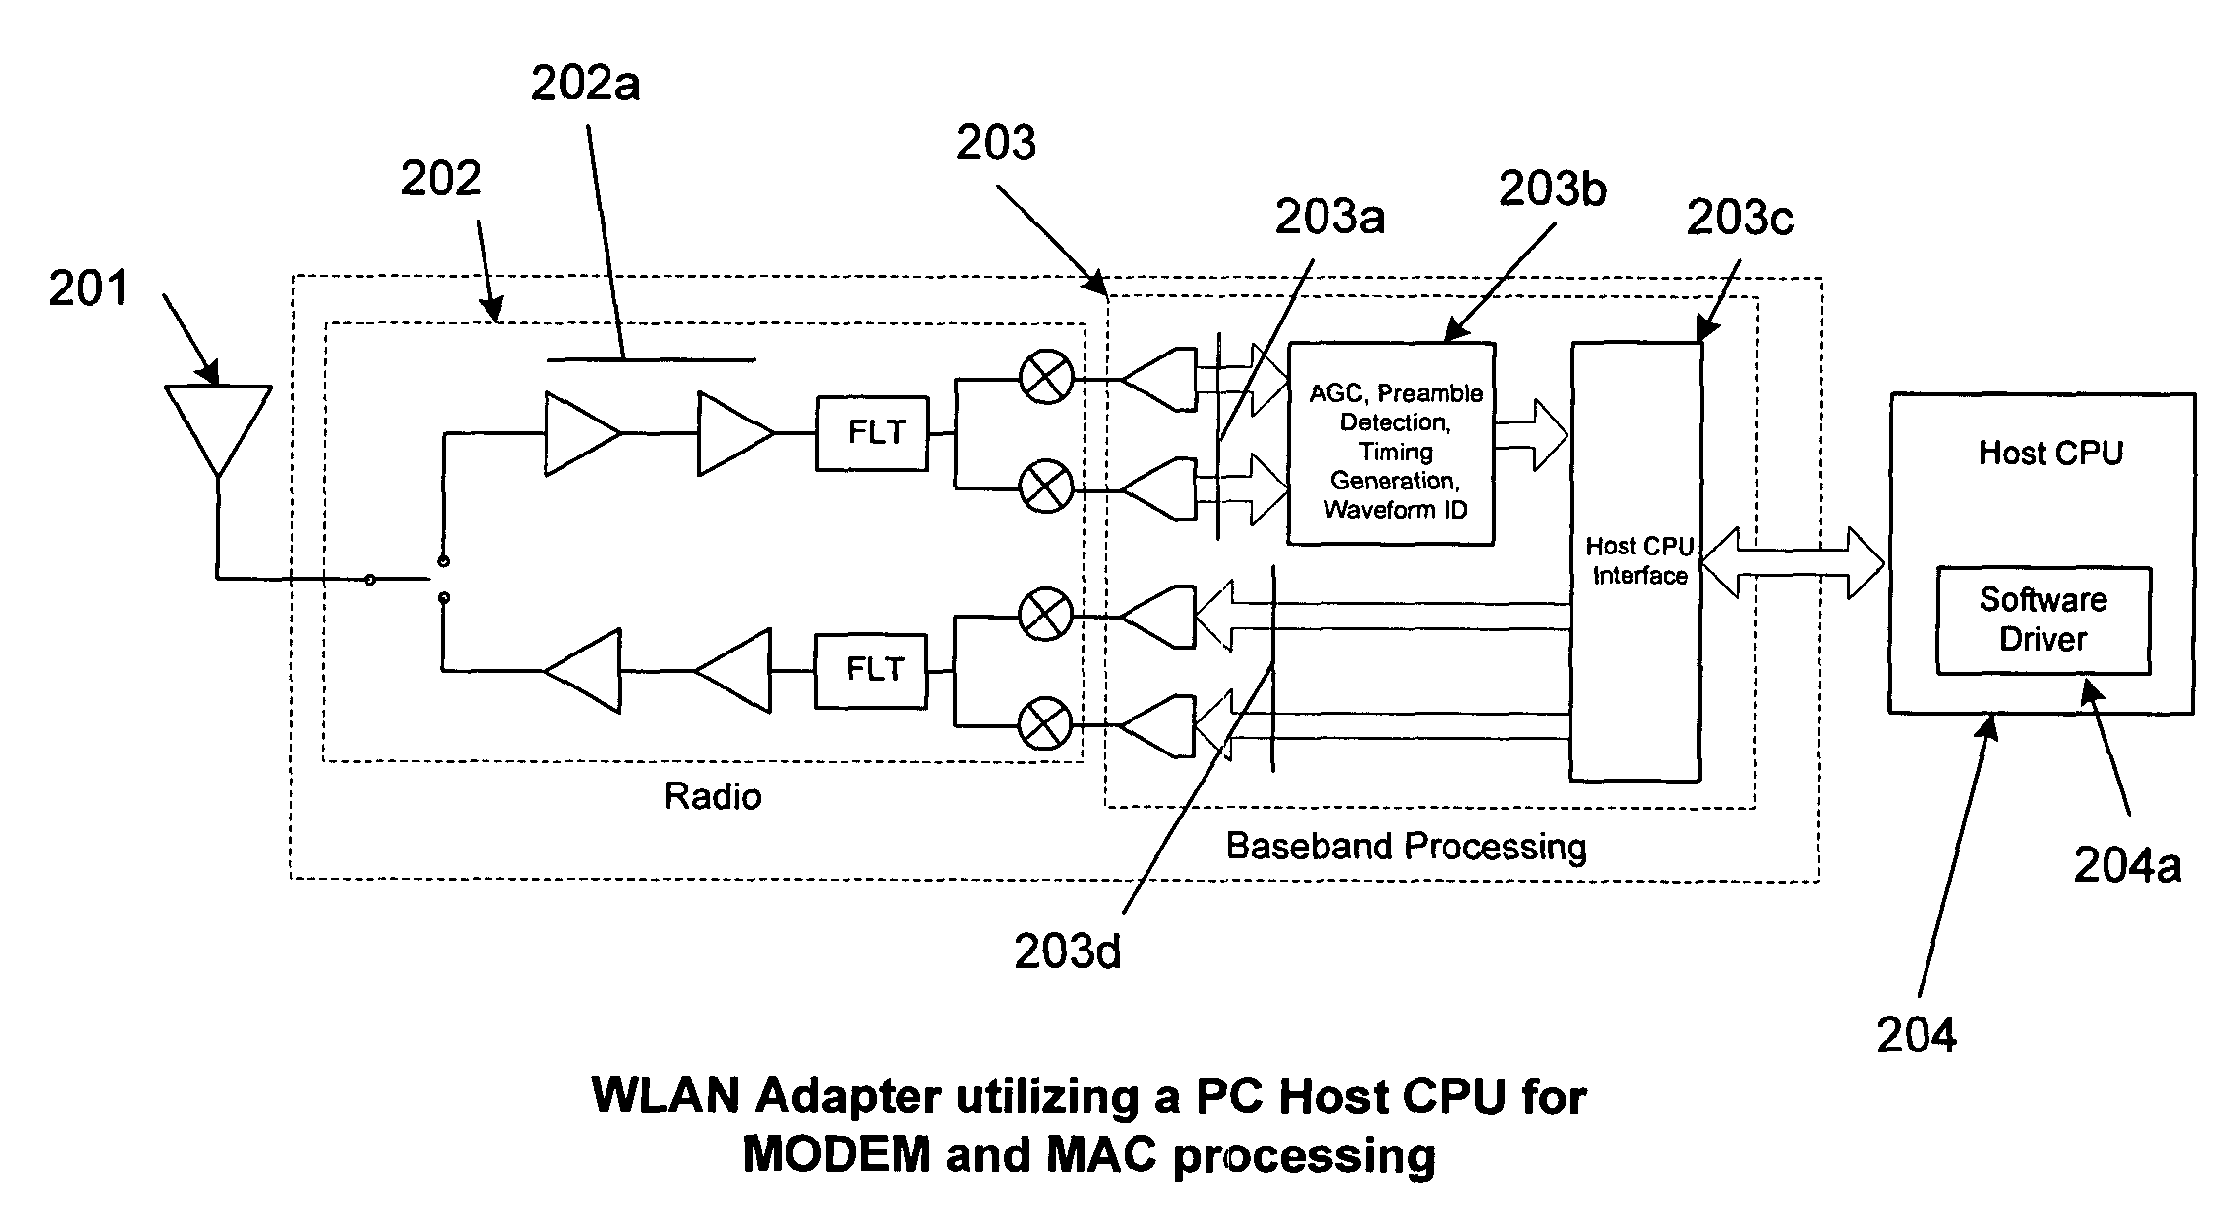 Method for Mitigating Adverse Processor Loading in a Personal Computer Implementation of a Wireless Local Area Network Adapter